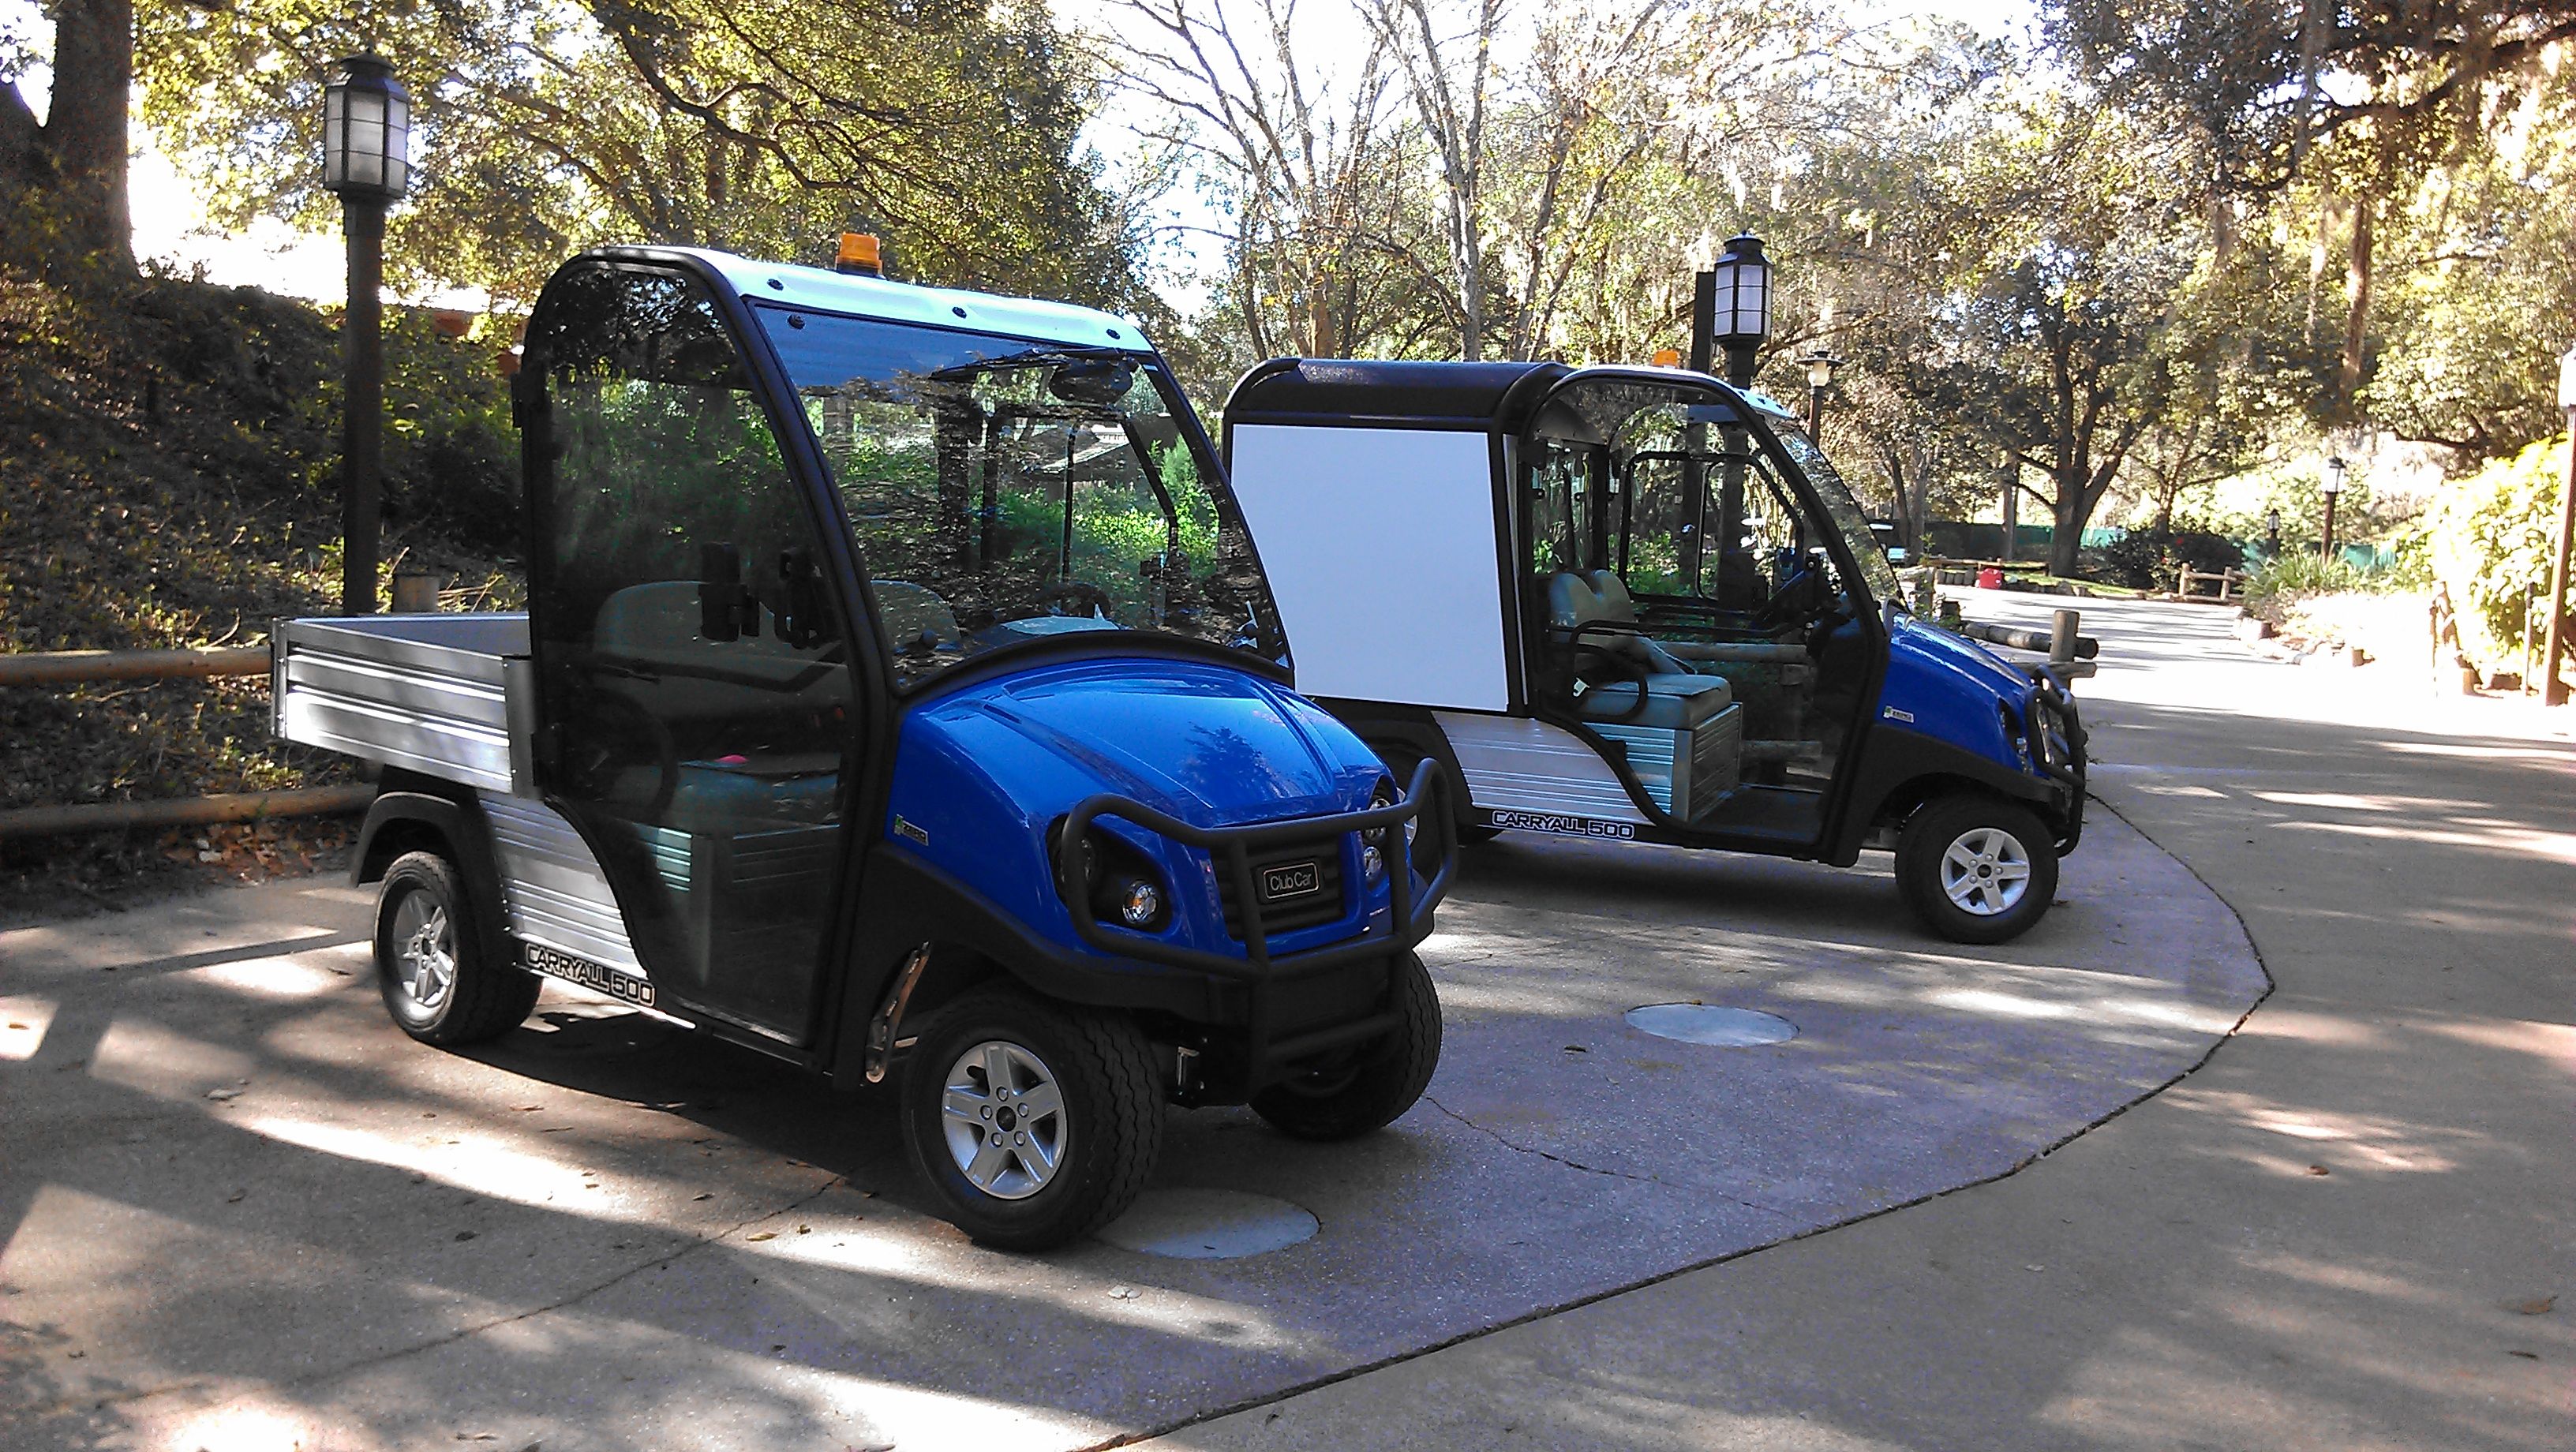 Club Car Hosts Media Event to Introduce New Carryall® Utility Vehicles